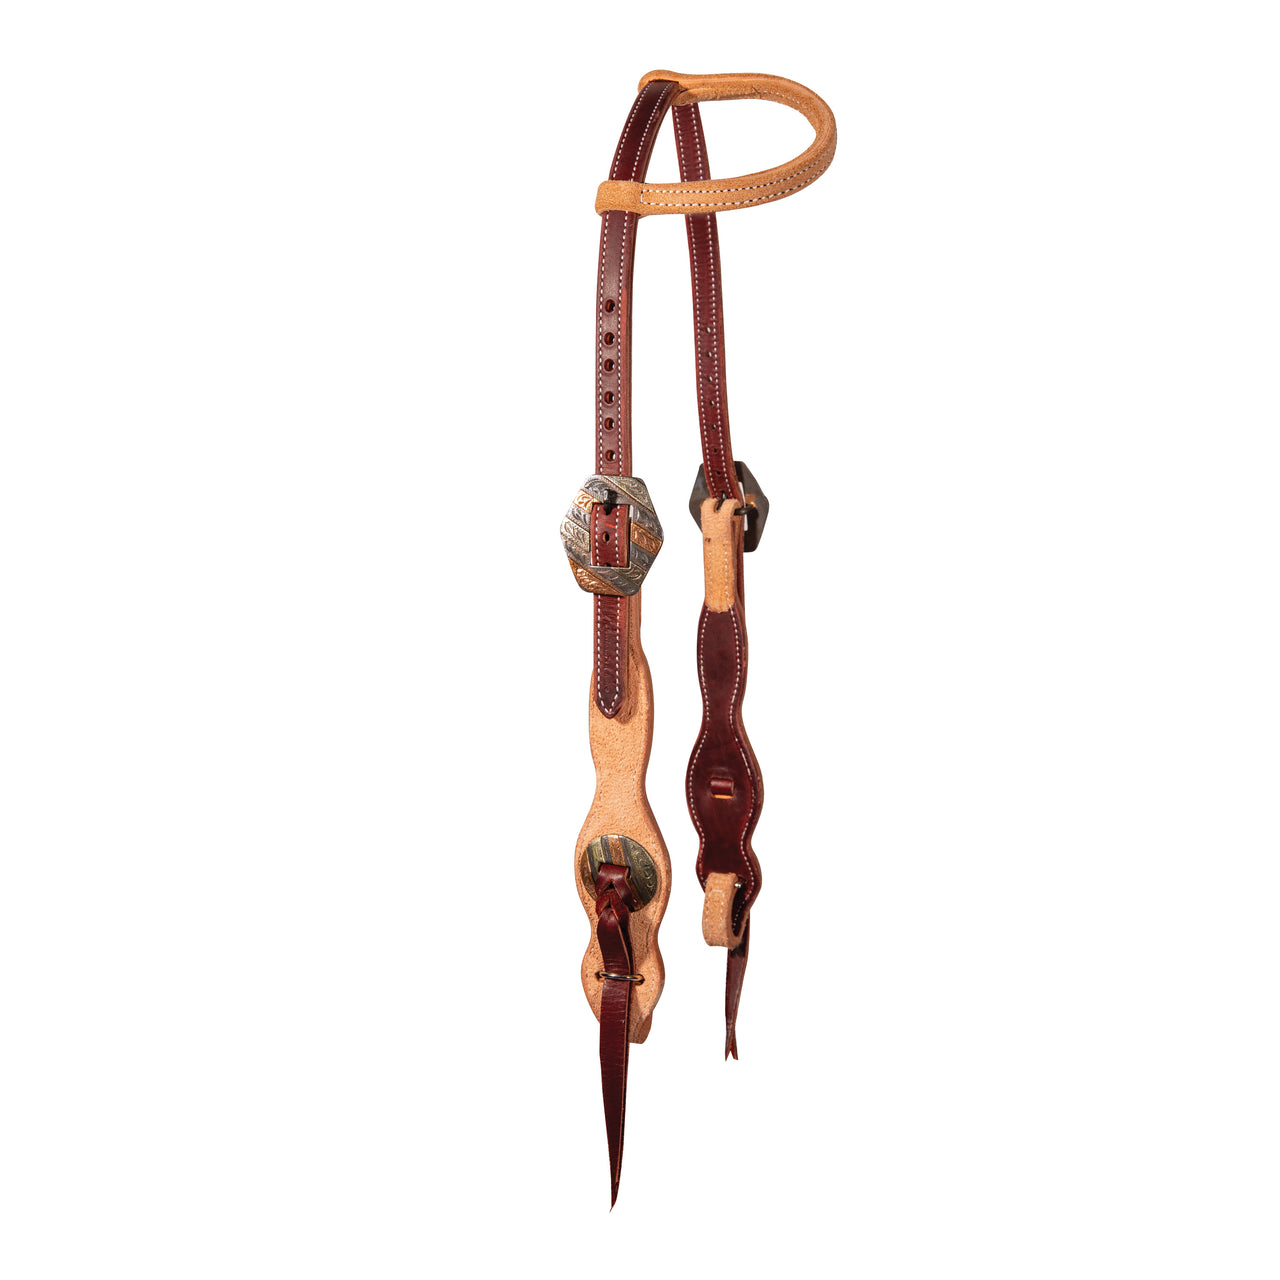 Professional's Choice 1 Ear Quick Change Tassel Headstall - Two Tone Roughout